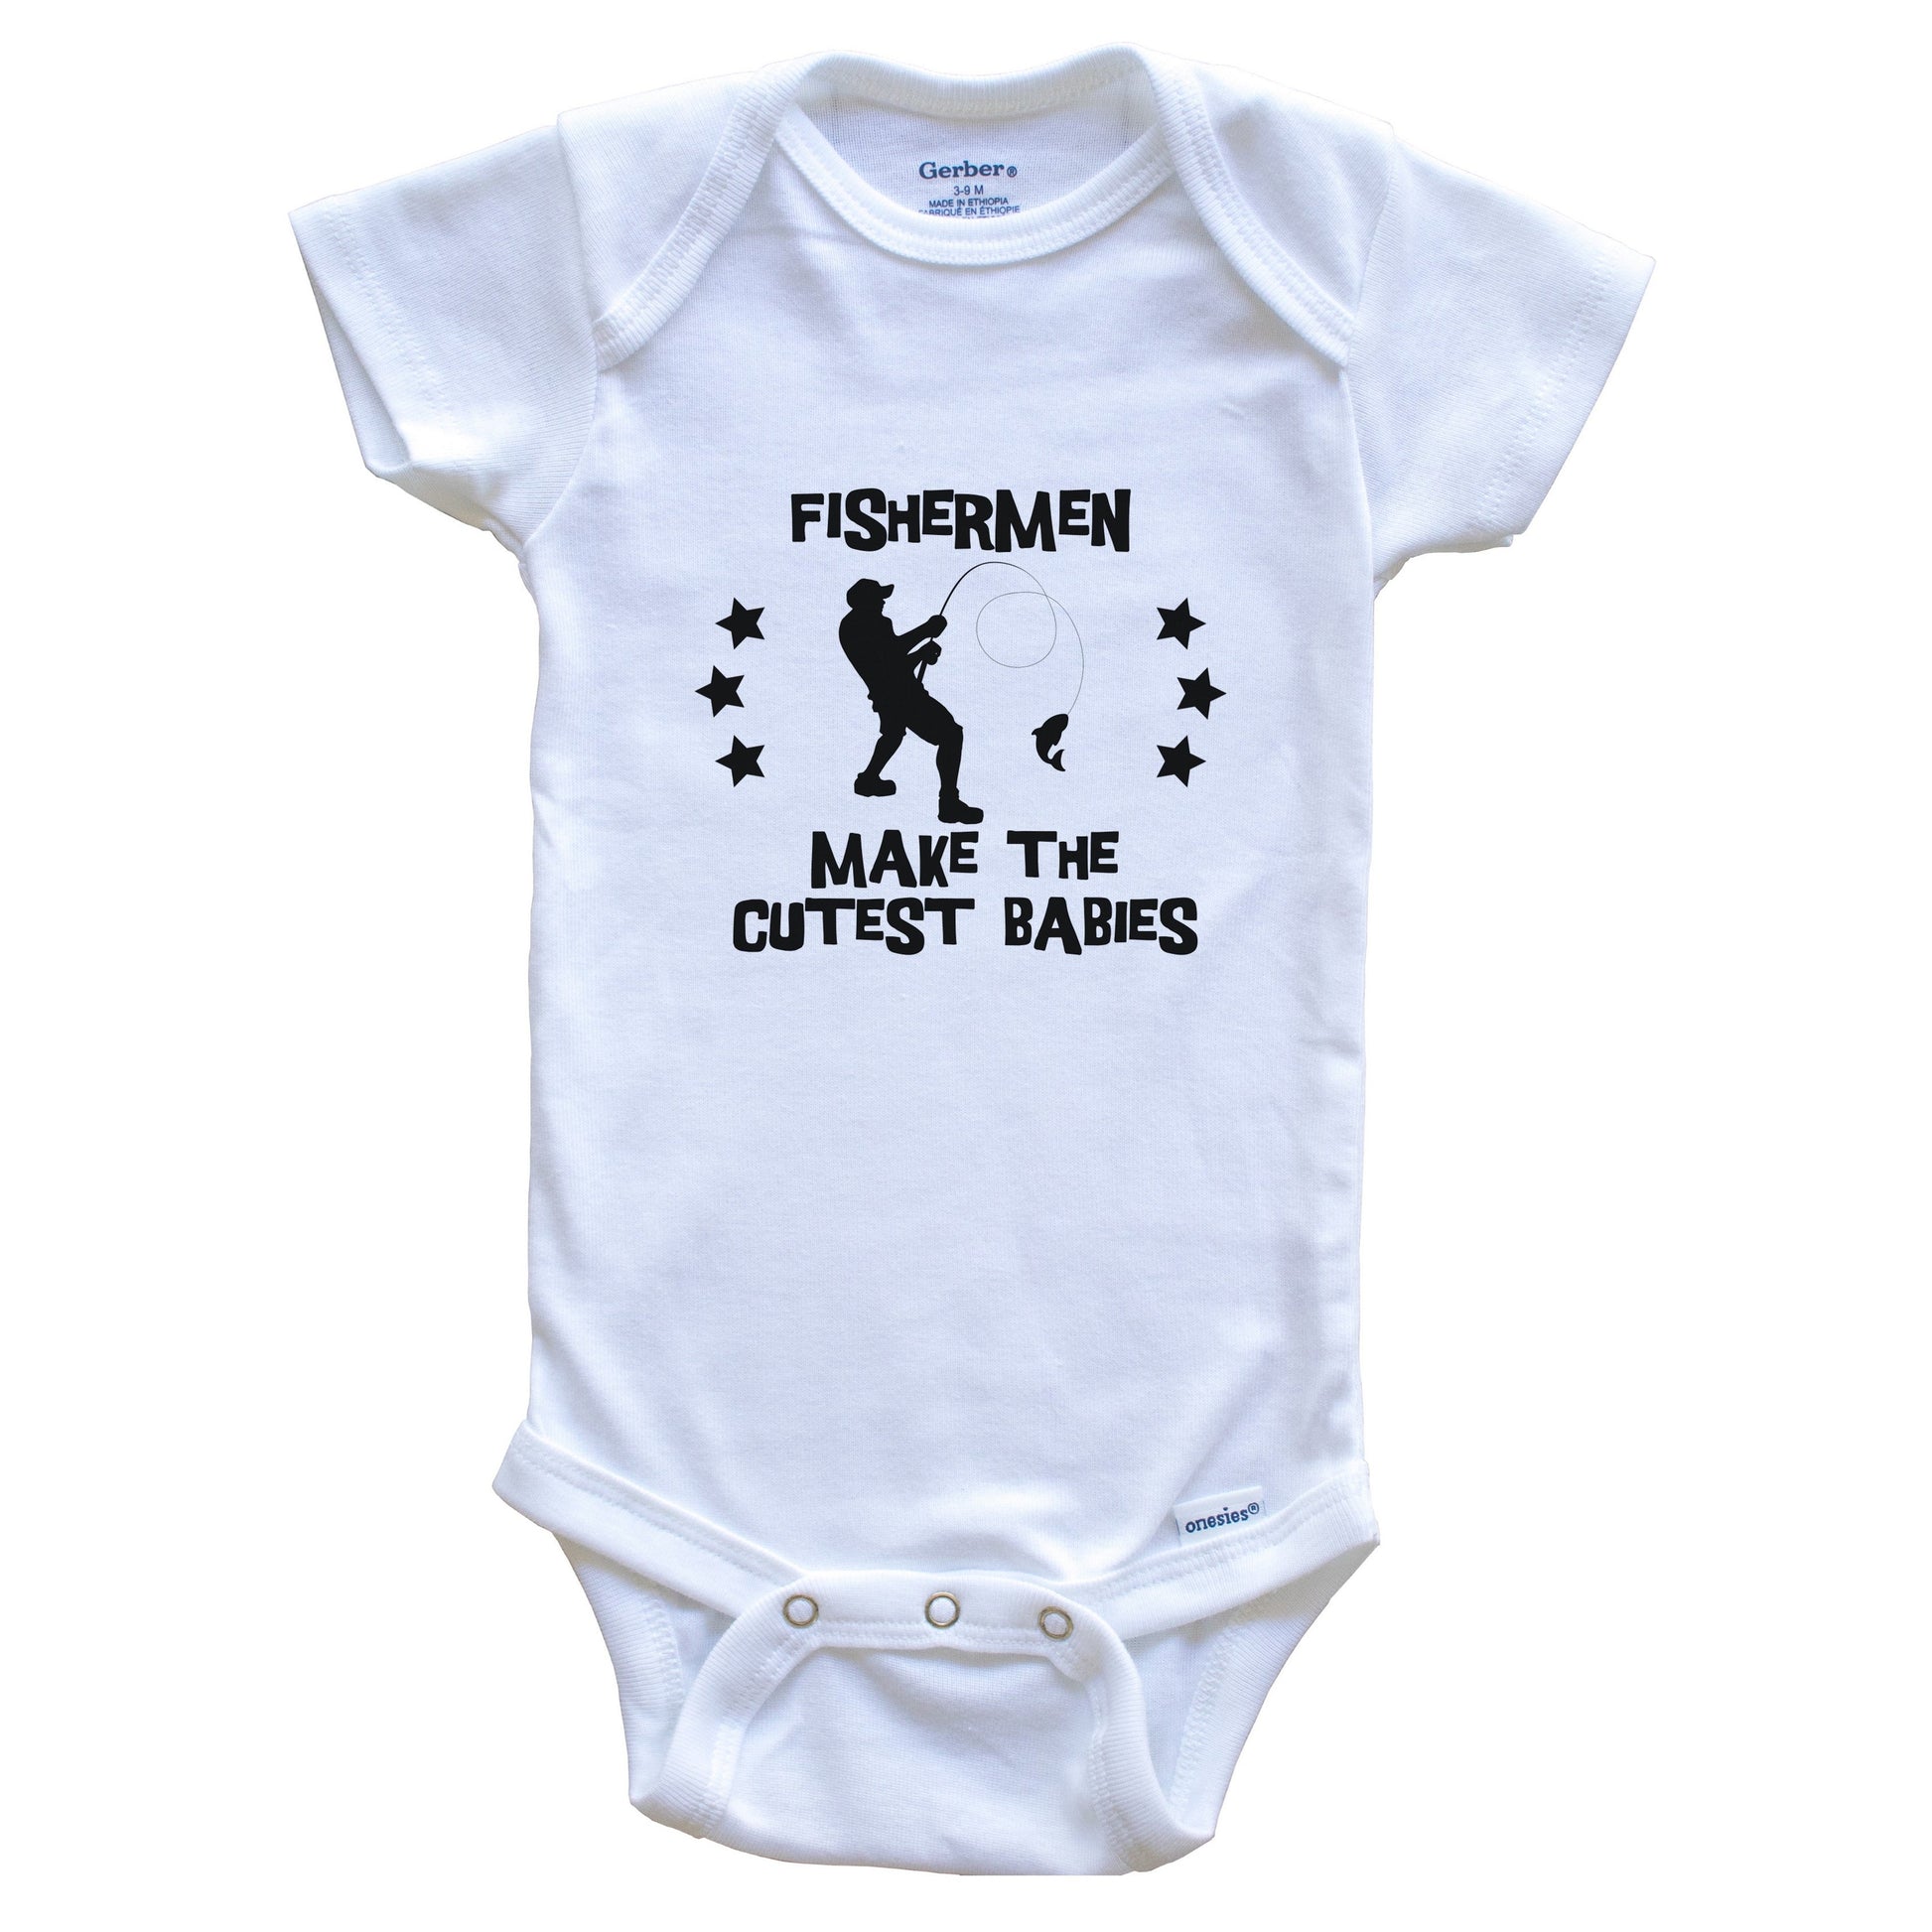 Fishermen Make The Cutest Babies Funny Fishing Baby Bodysuit 0-3 Months / White